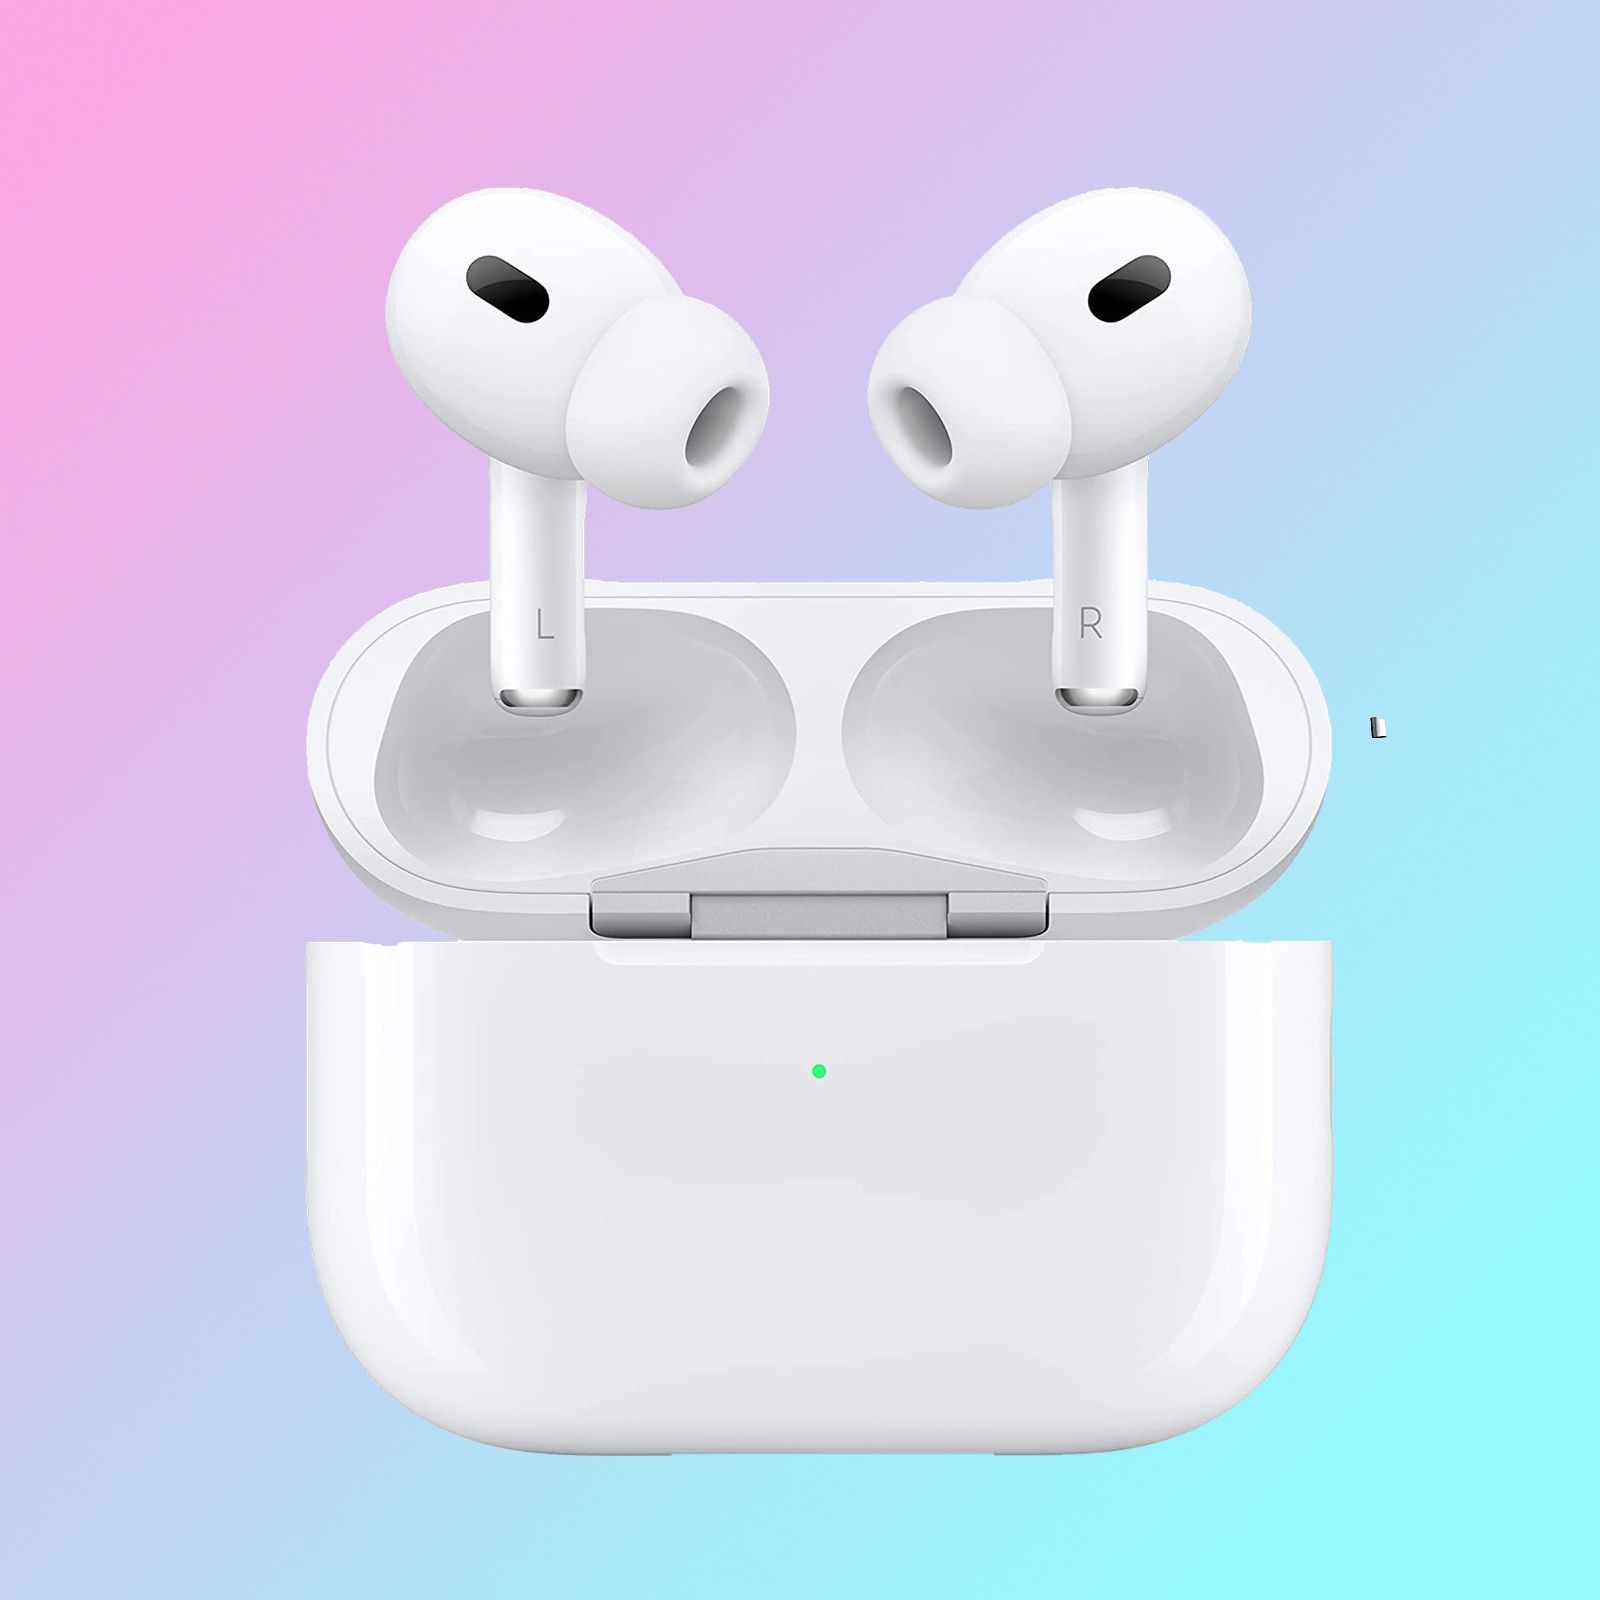 AirPods Pro 2 square